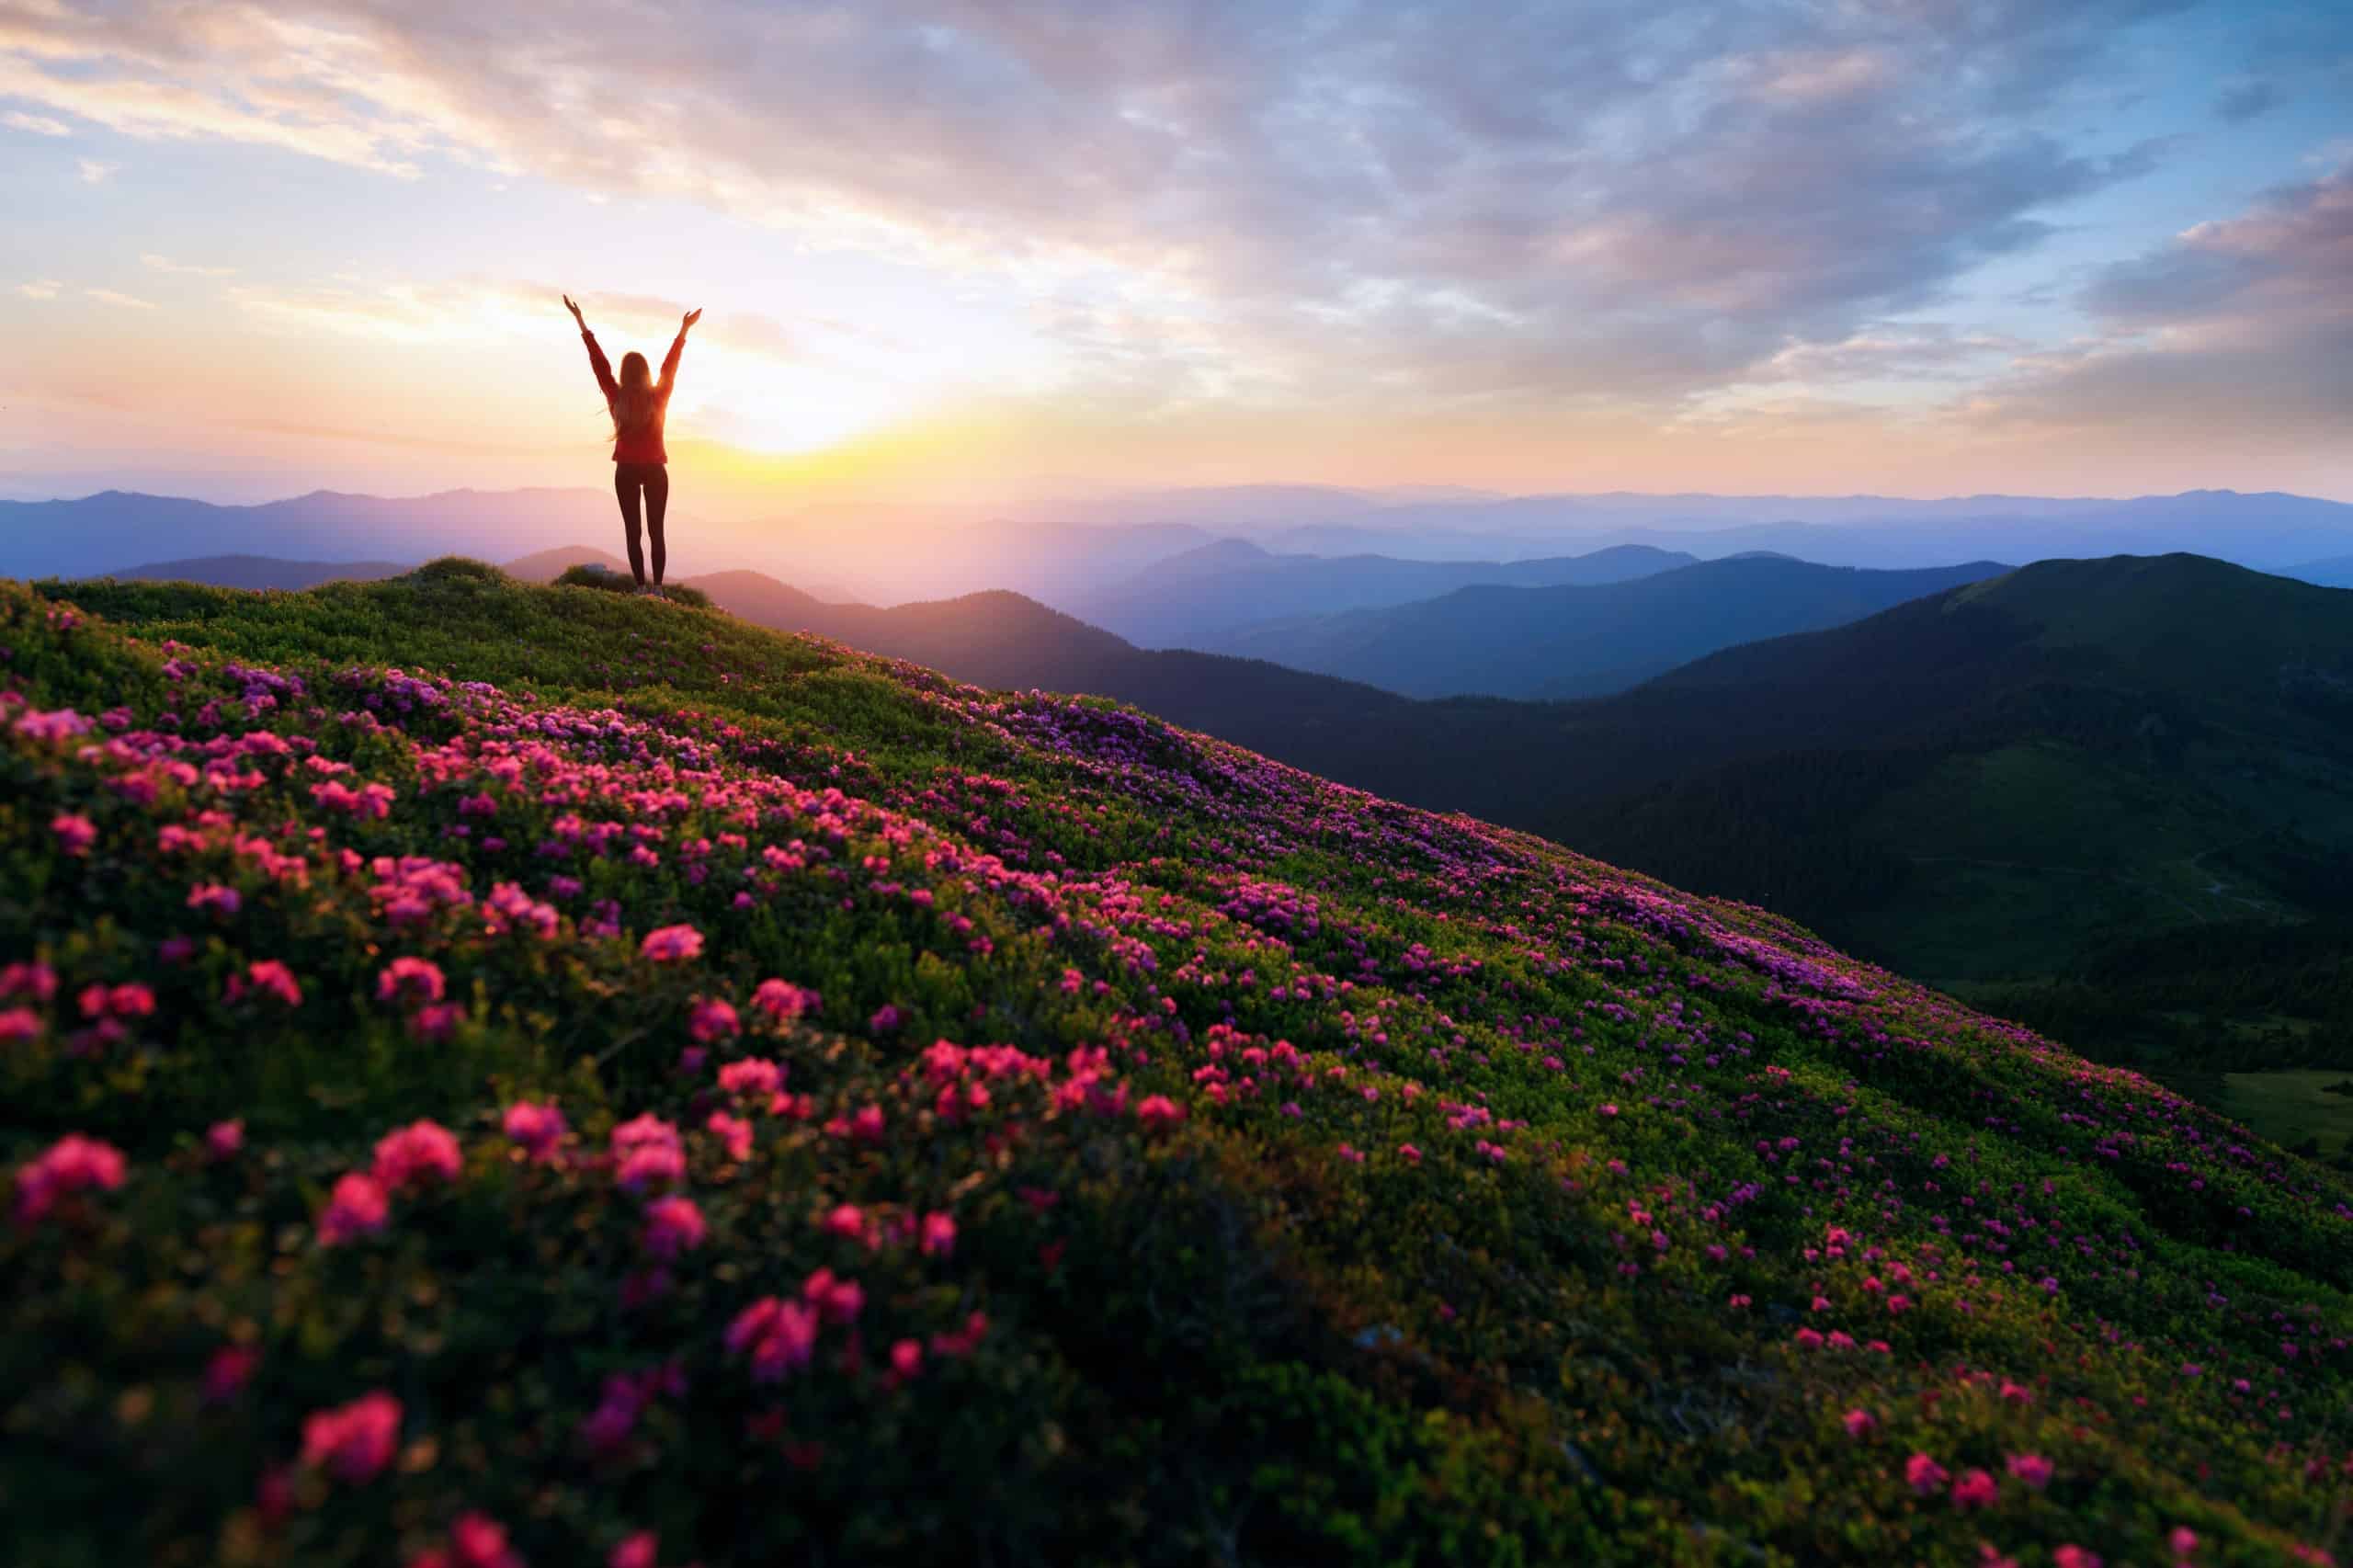 Woman standing up on a mountain and a field of flowers.